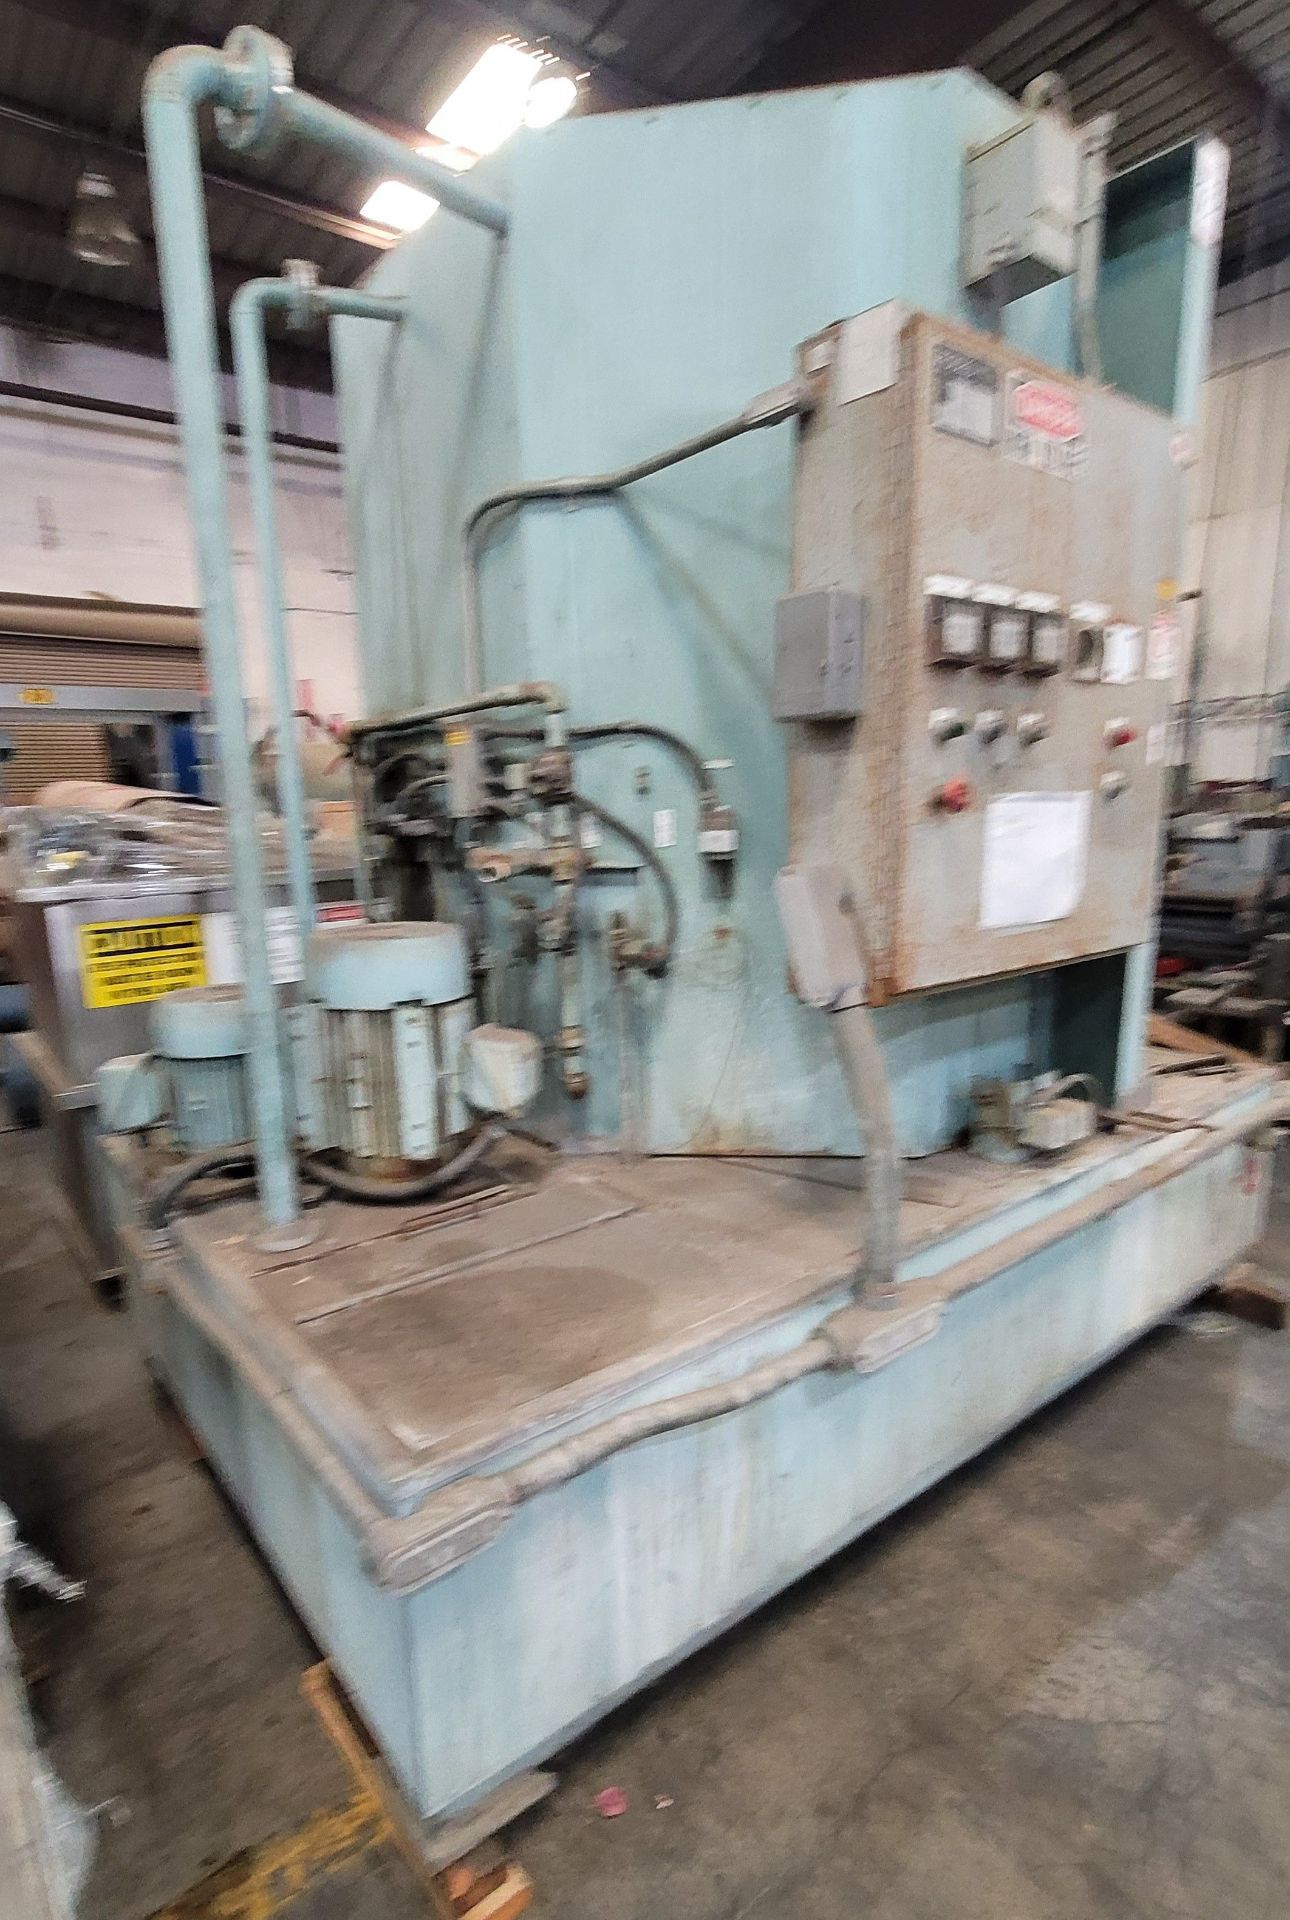 PROCECO INDUSTRIAL PARTS WASHER, MODEL TYPHOON HD, S/N 93-220 - Image 3 of 11